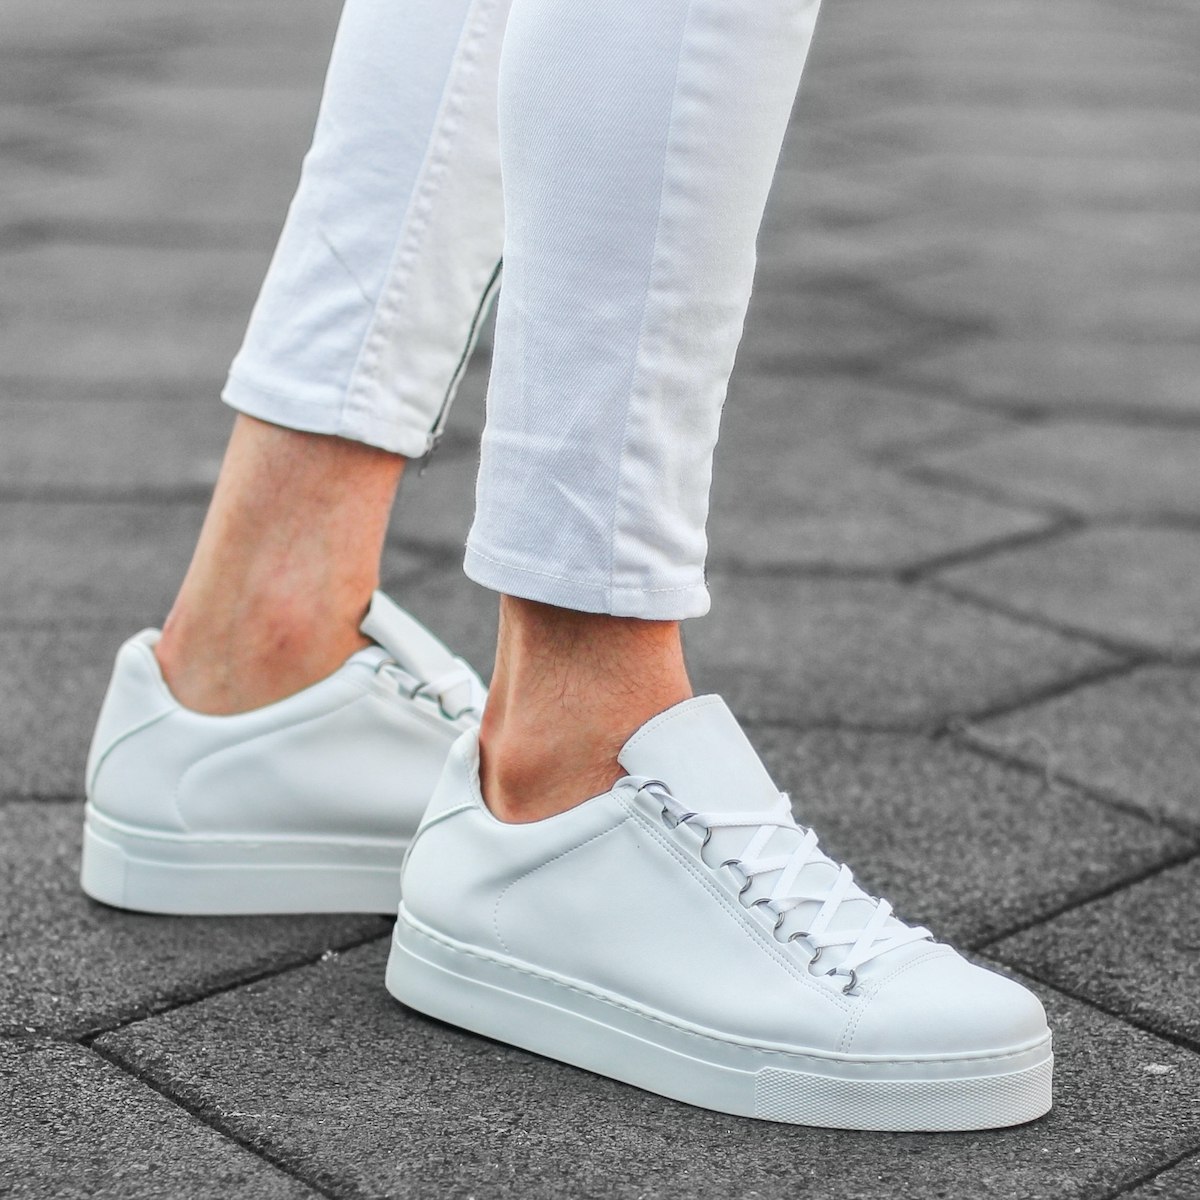 Men’s Low Top Outdoor Sneakers Shoes White